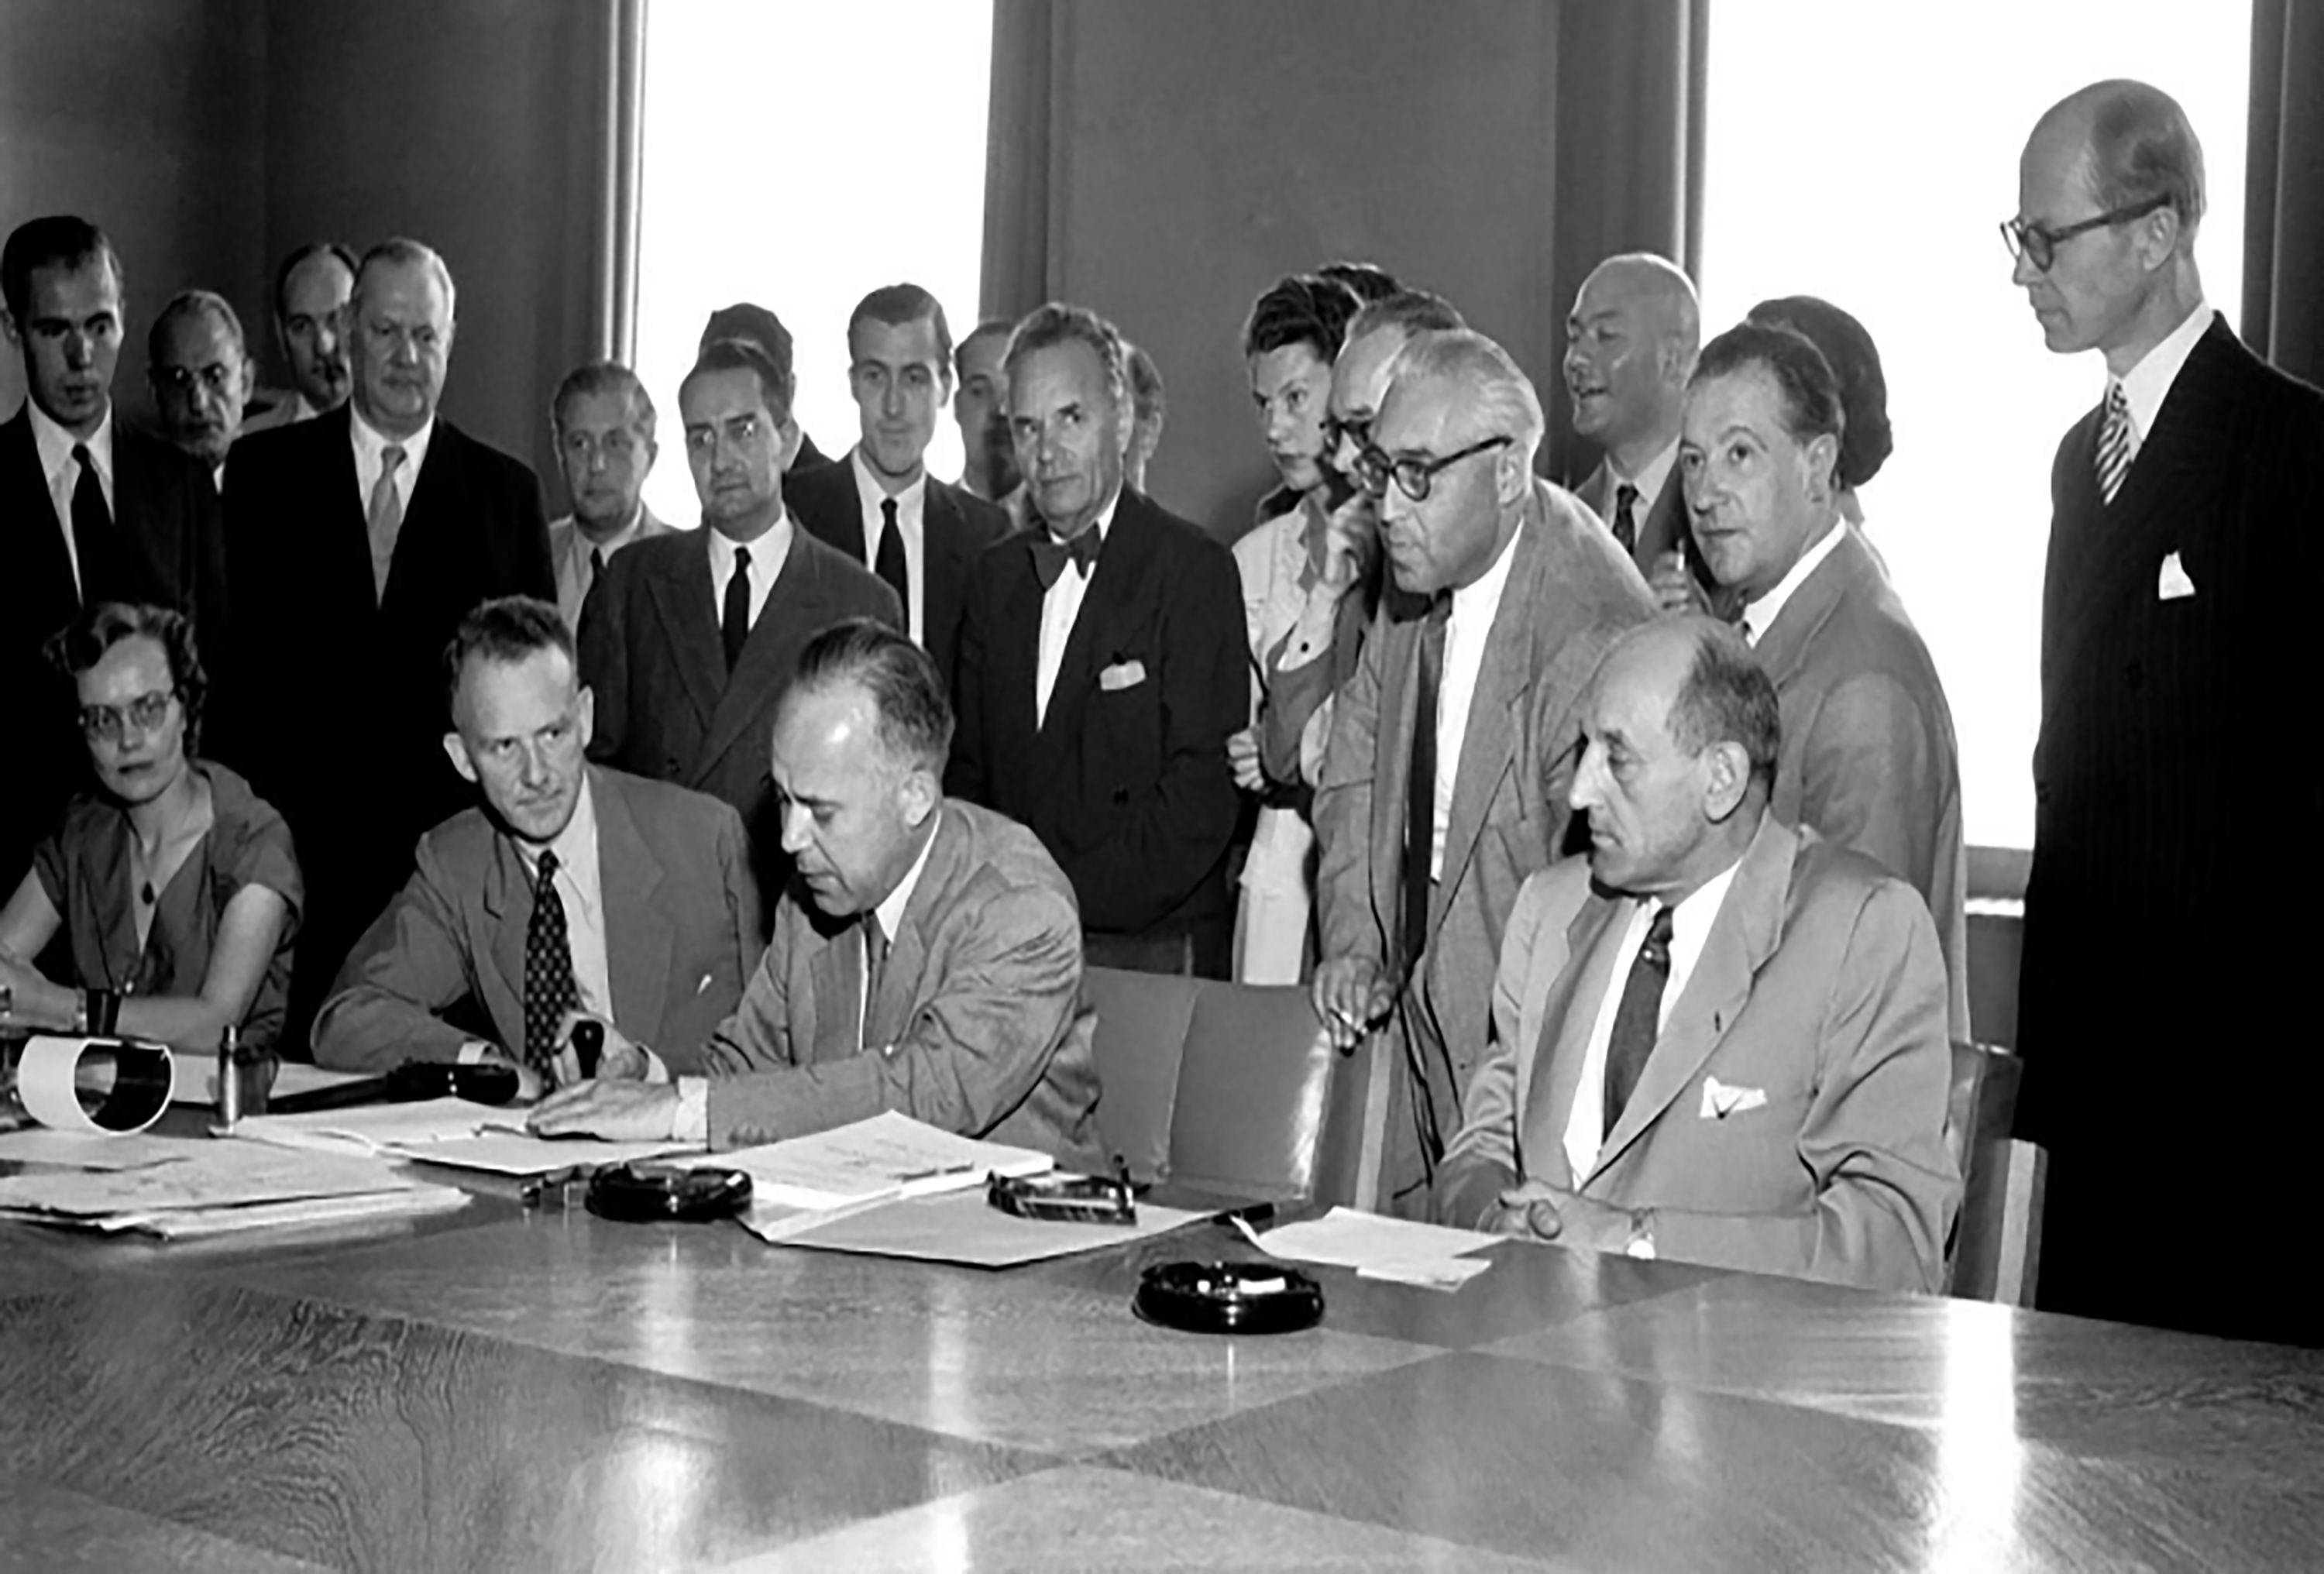 Signing the Convention Relating to the Status of Refugees in Geneva, 28 July 1951, with Margaret Kitchen sitting on the left. Credit: UN Photo/ES